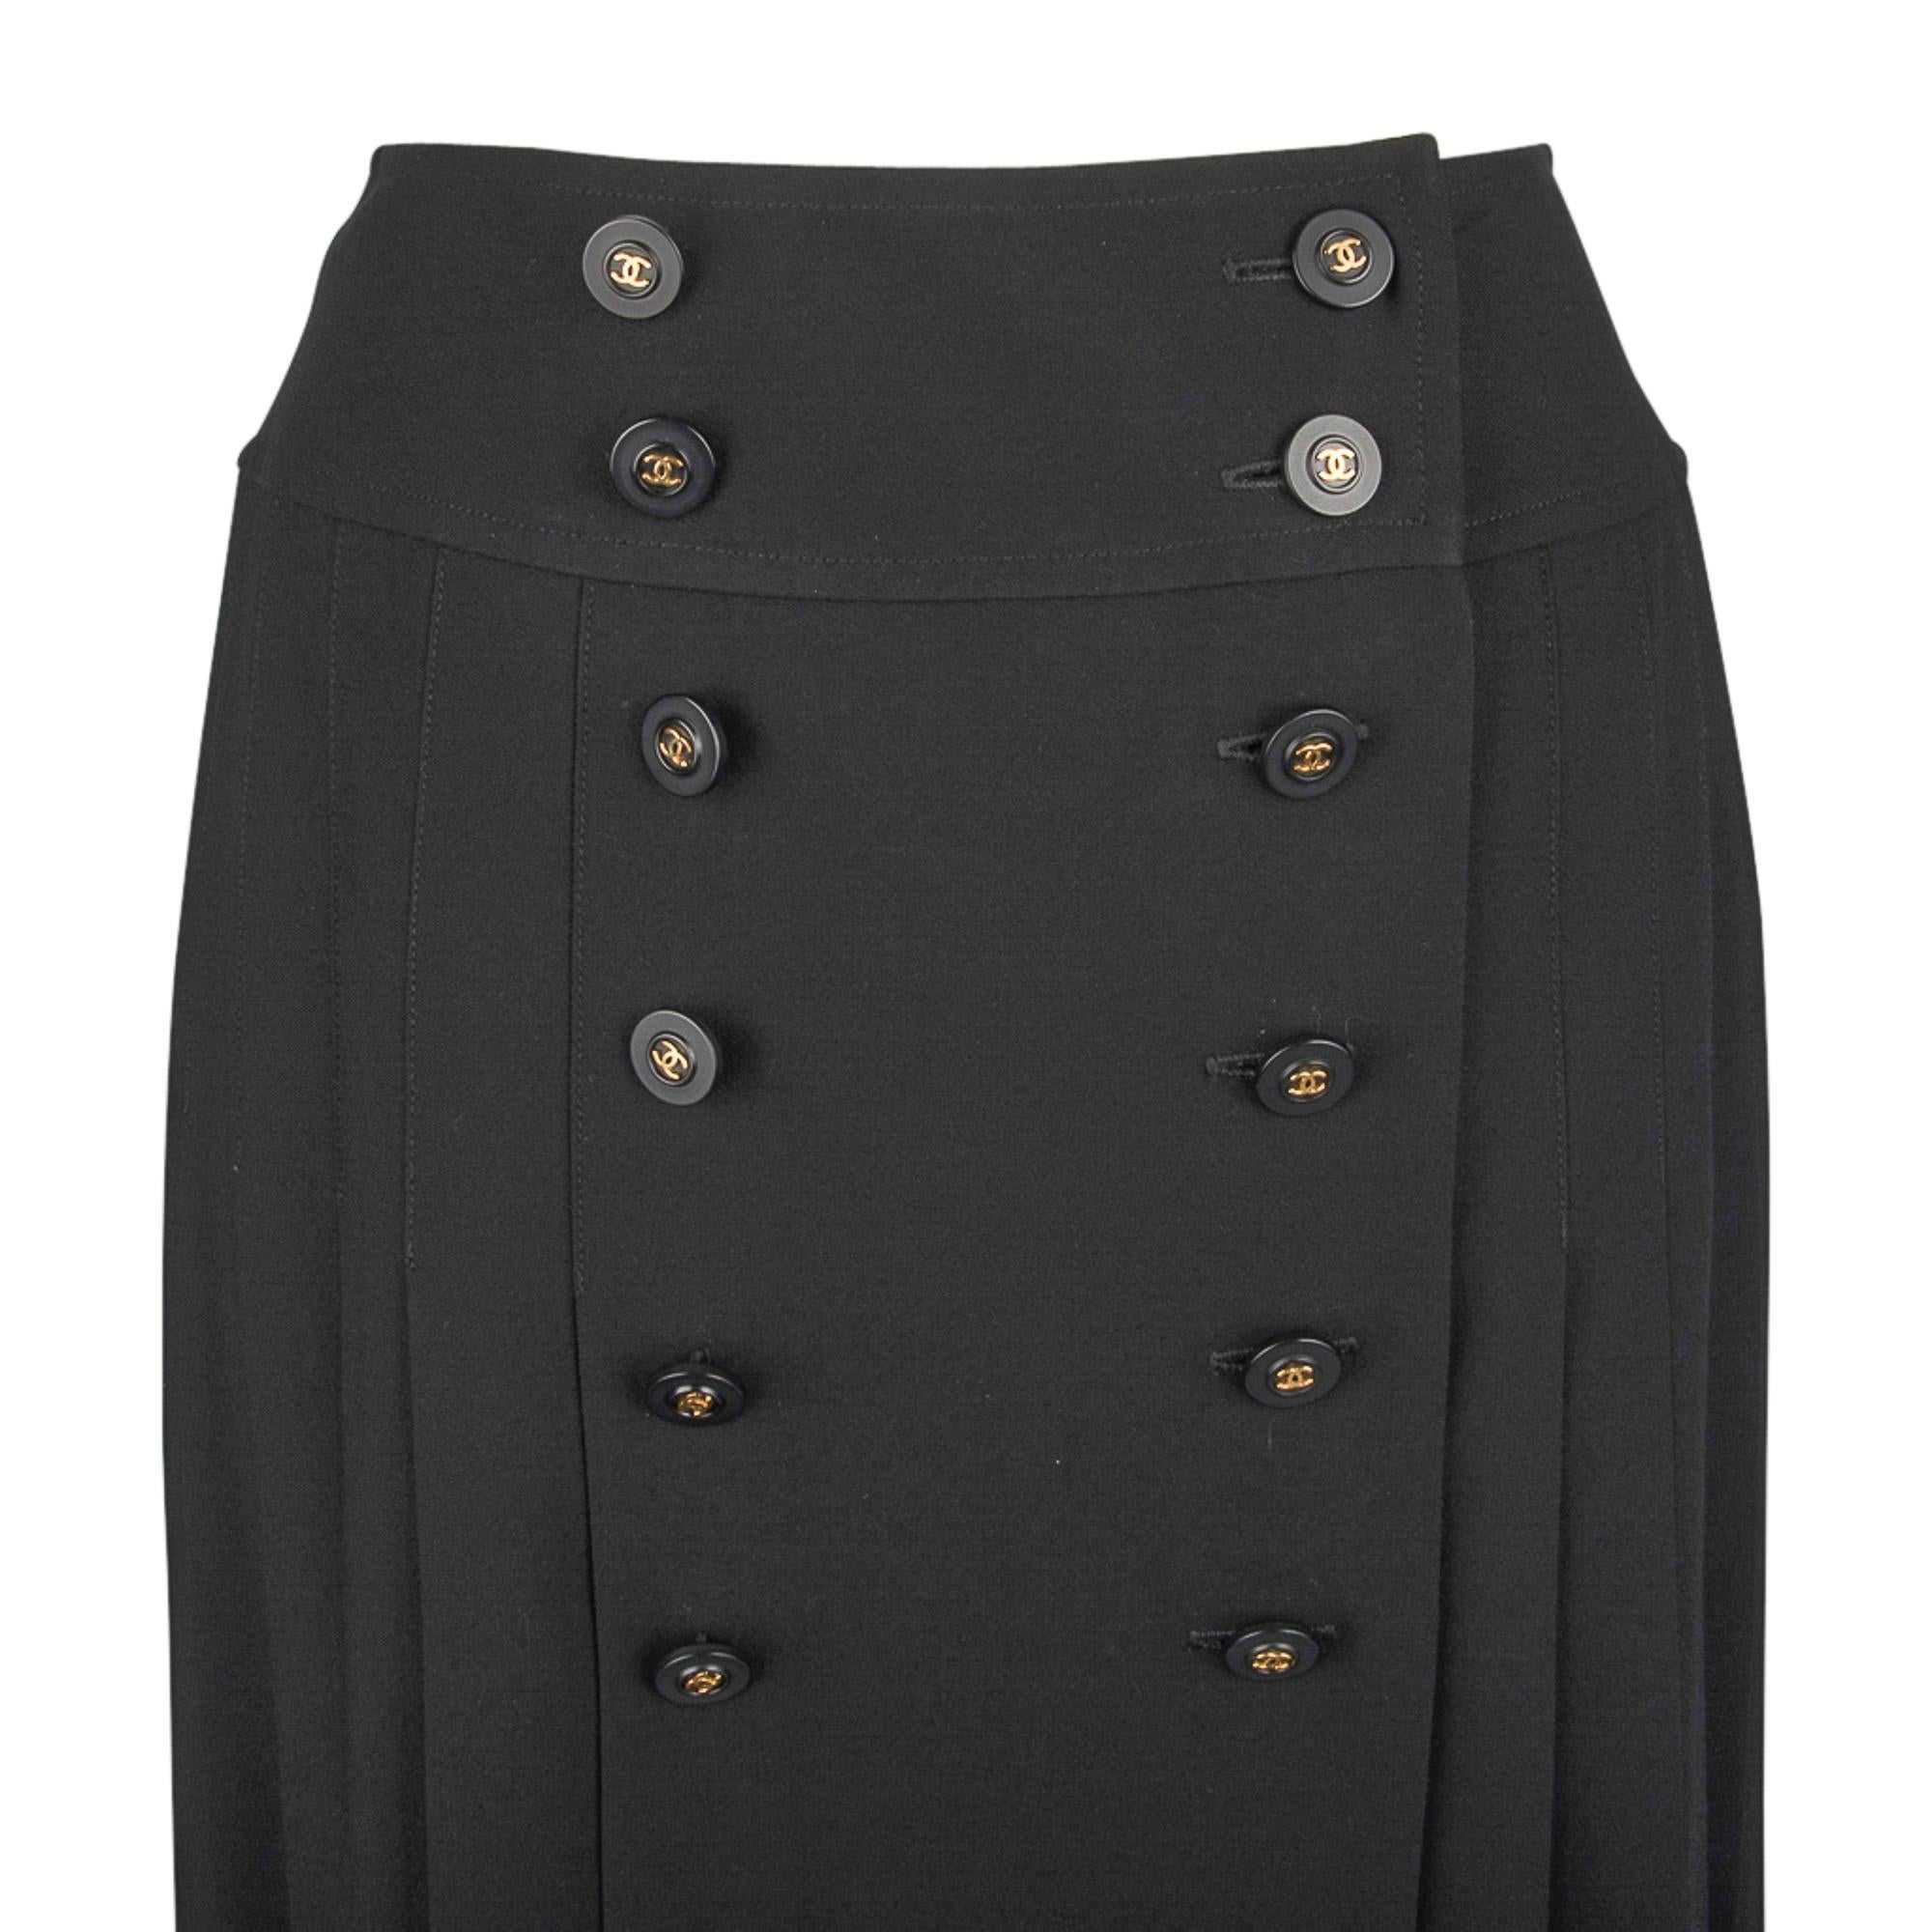 Guranteed authentic Chanel pleated black wool skirt.
Center placquet has 2 rows of 6 buttons each.
All buttons are black with gold center CC. 
3